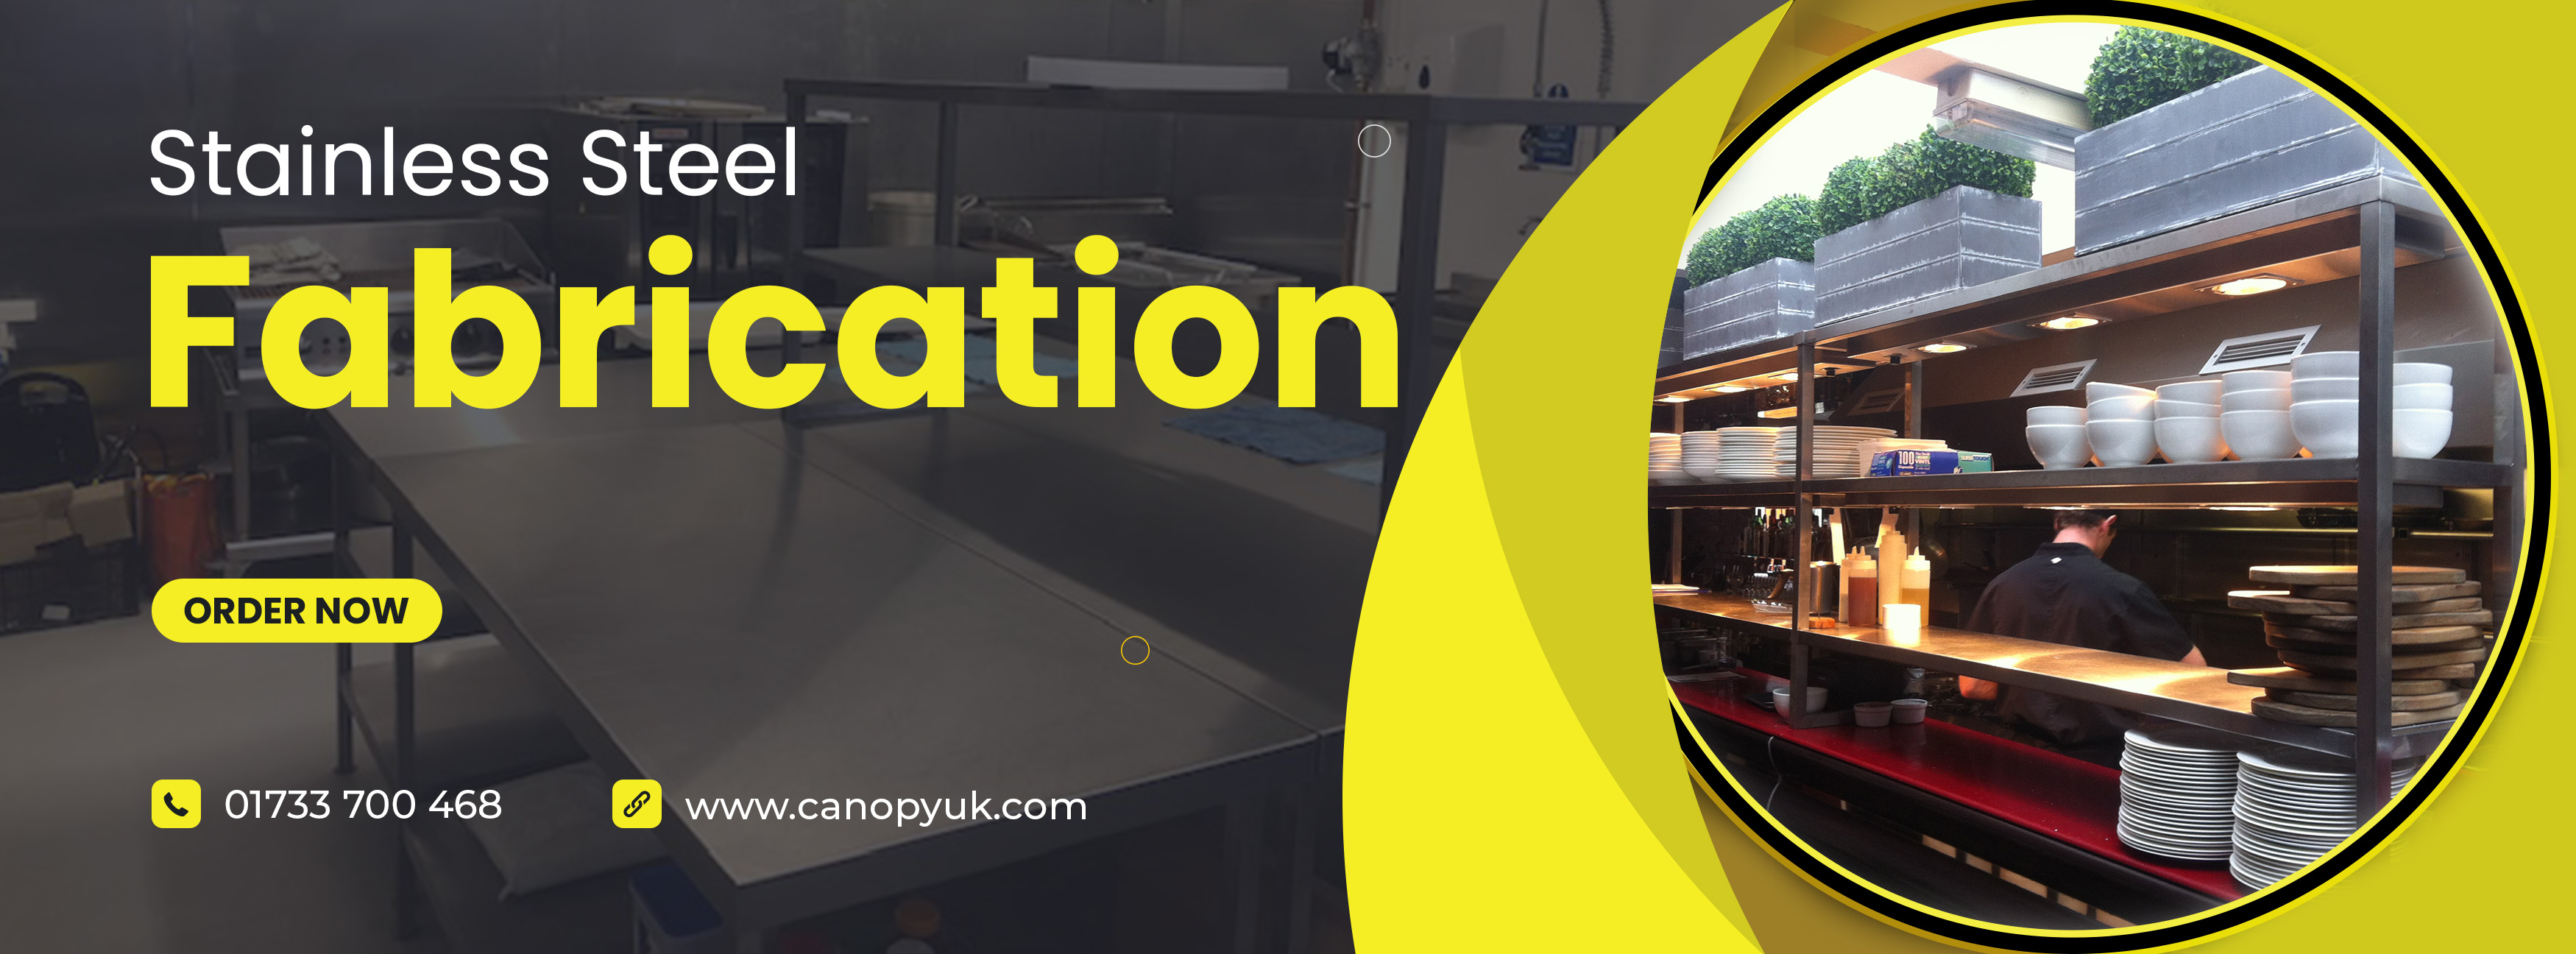 Quality Fabrication Services